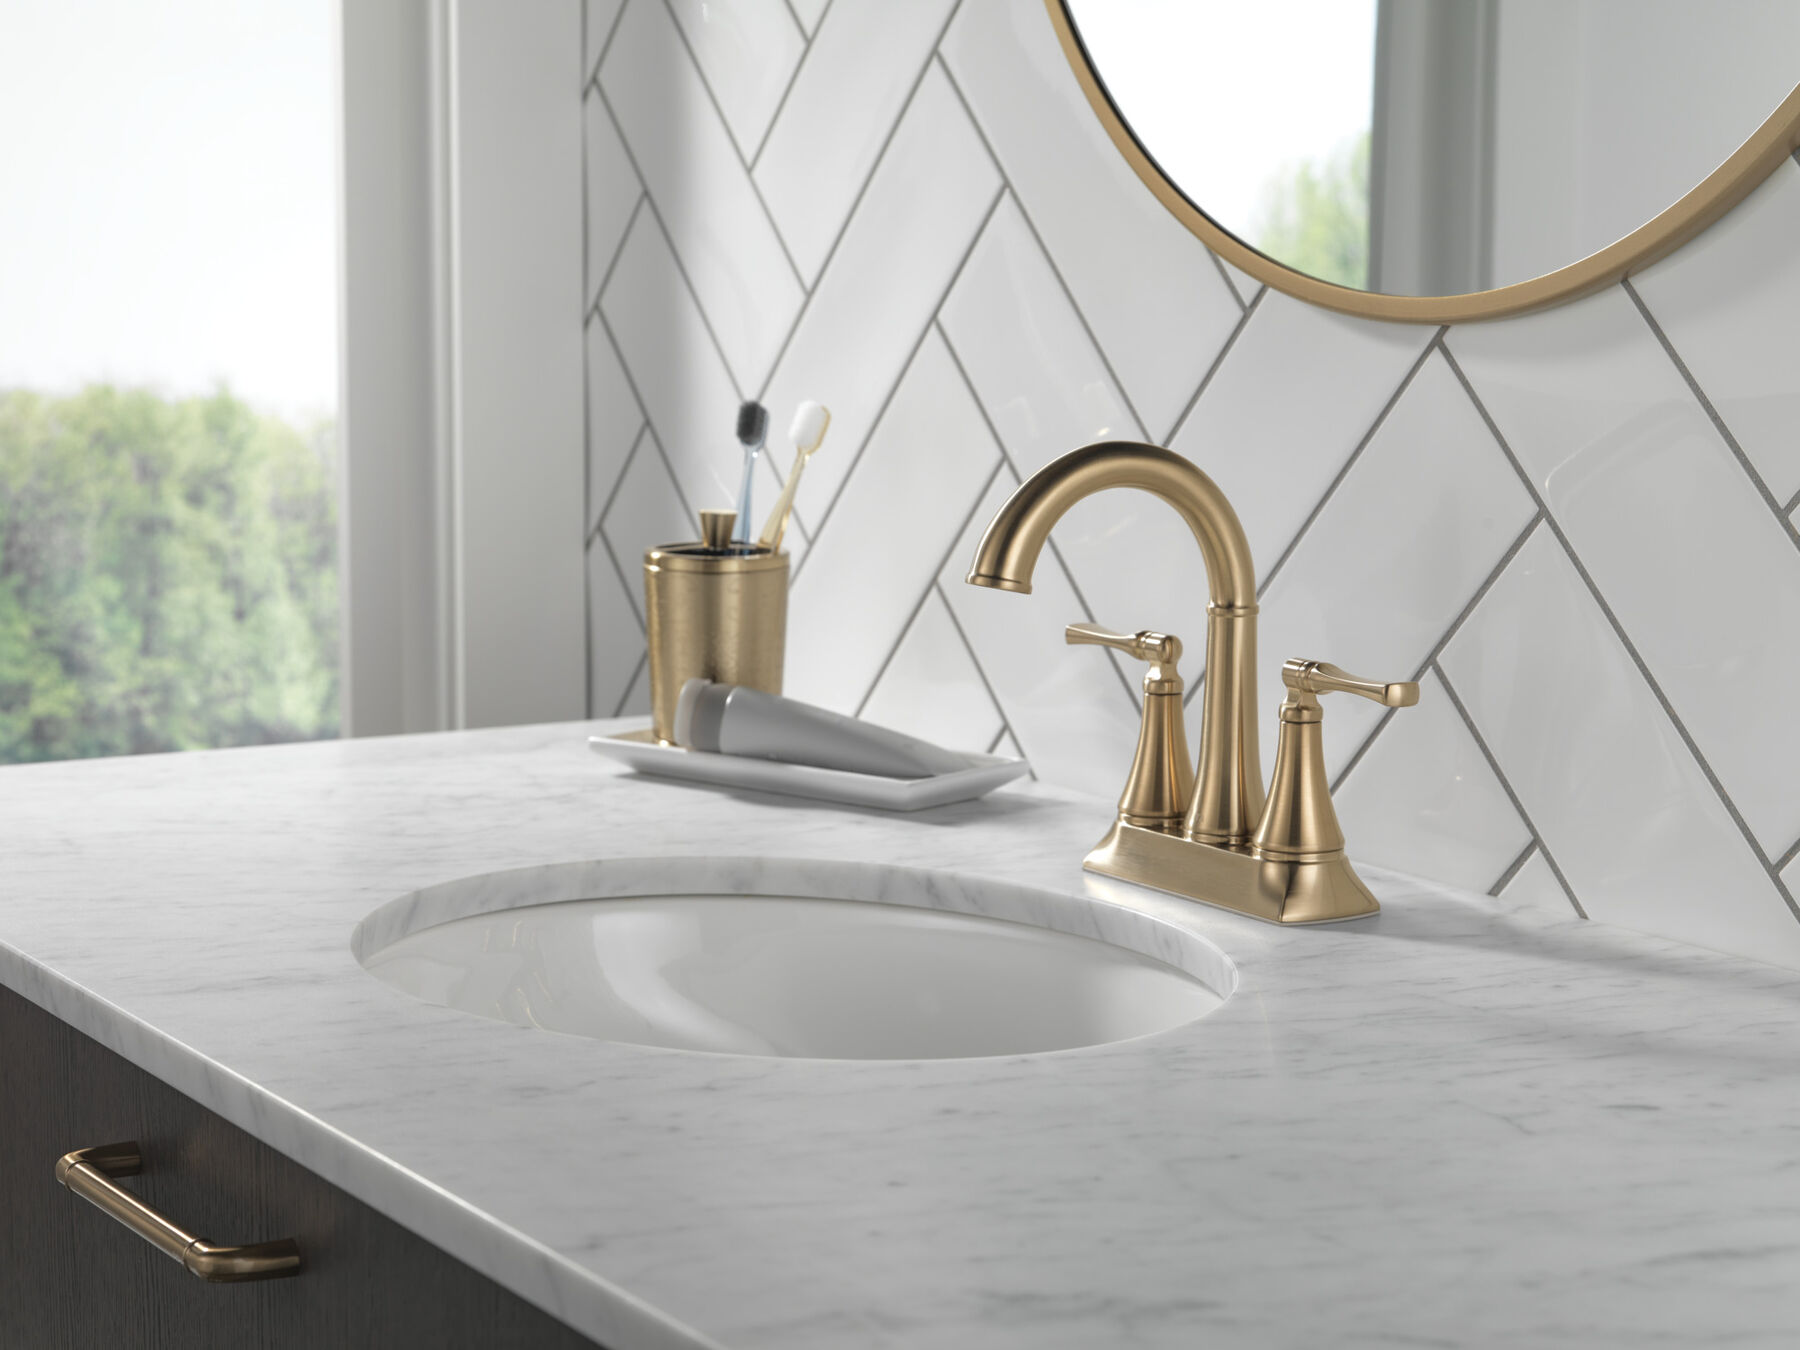 Two Handle Centerset Bathroom Faucet in Champagne Bronze 25798LF